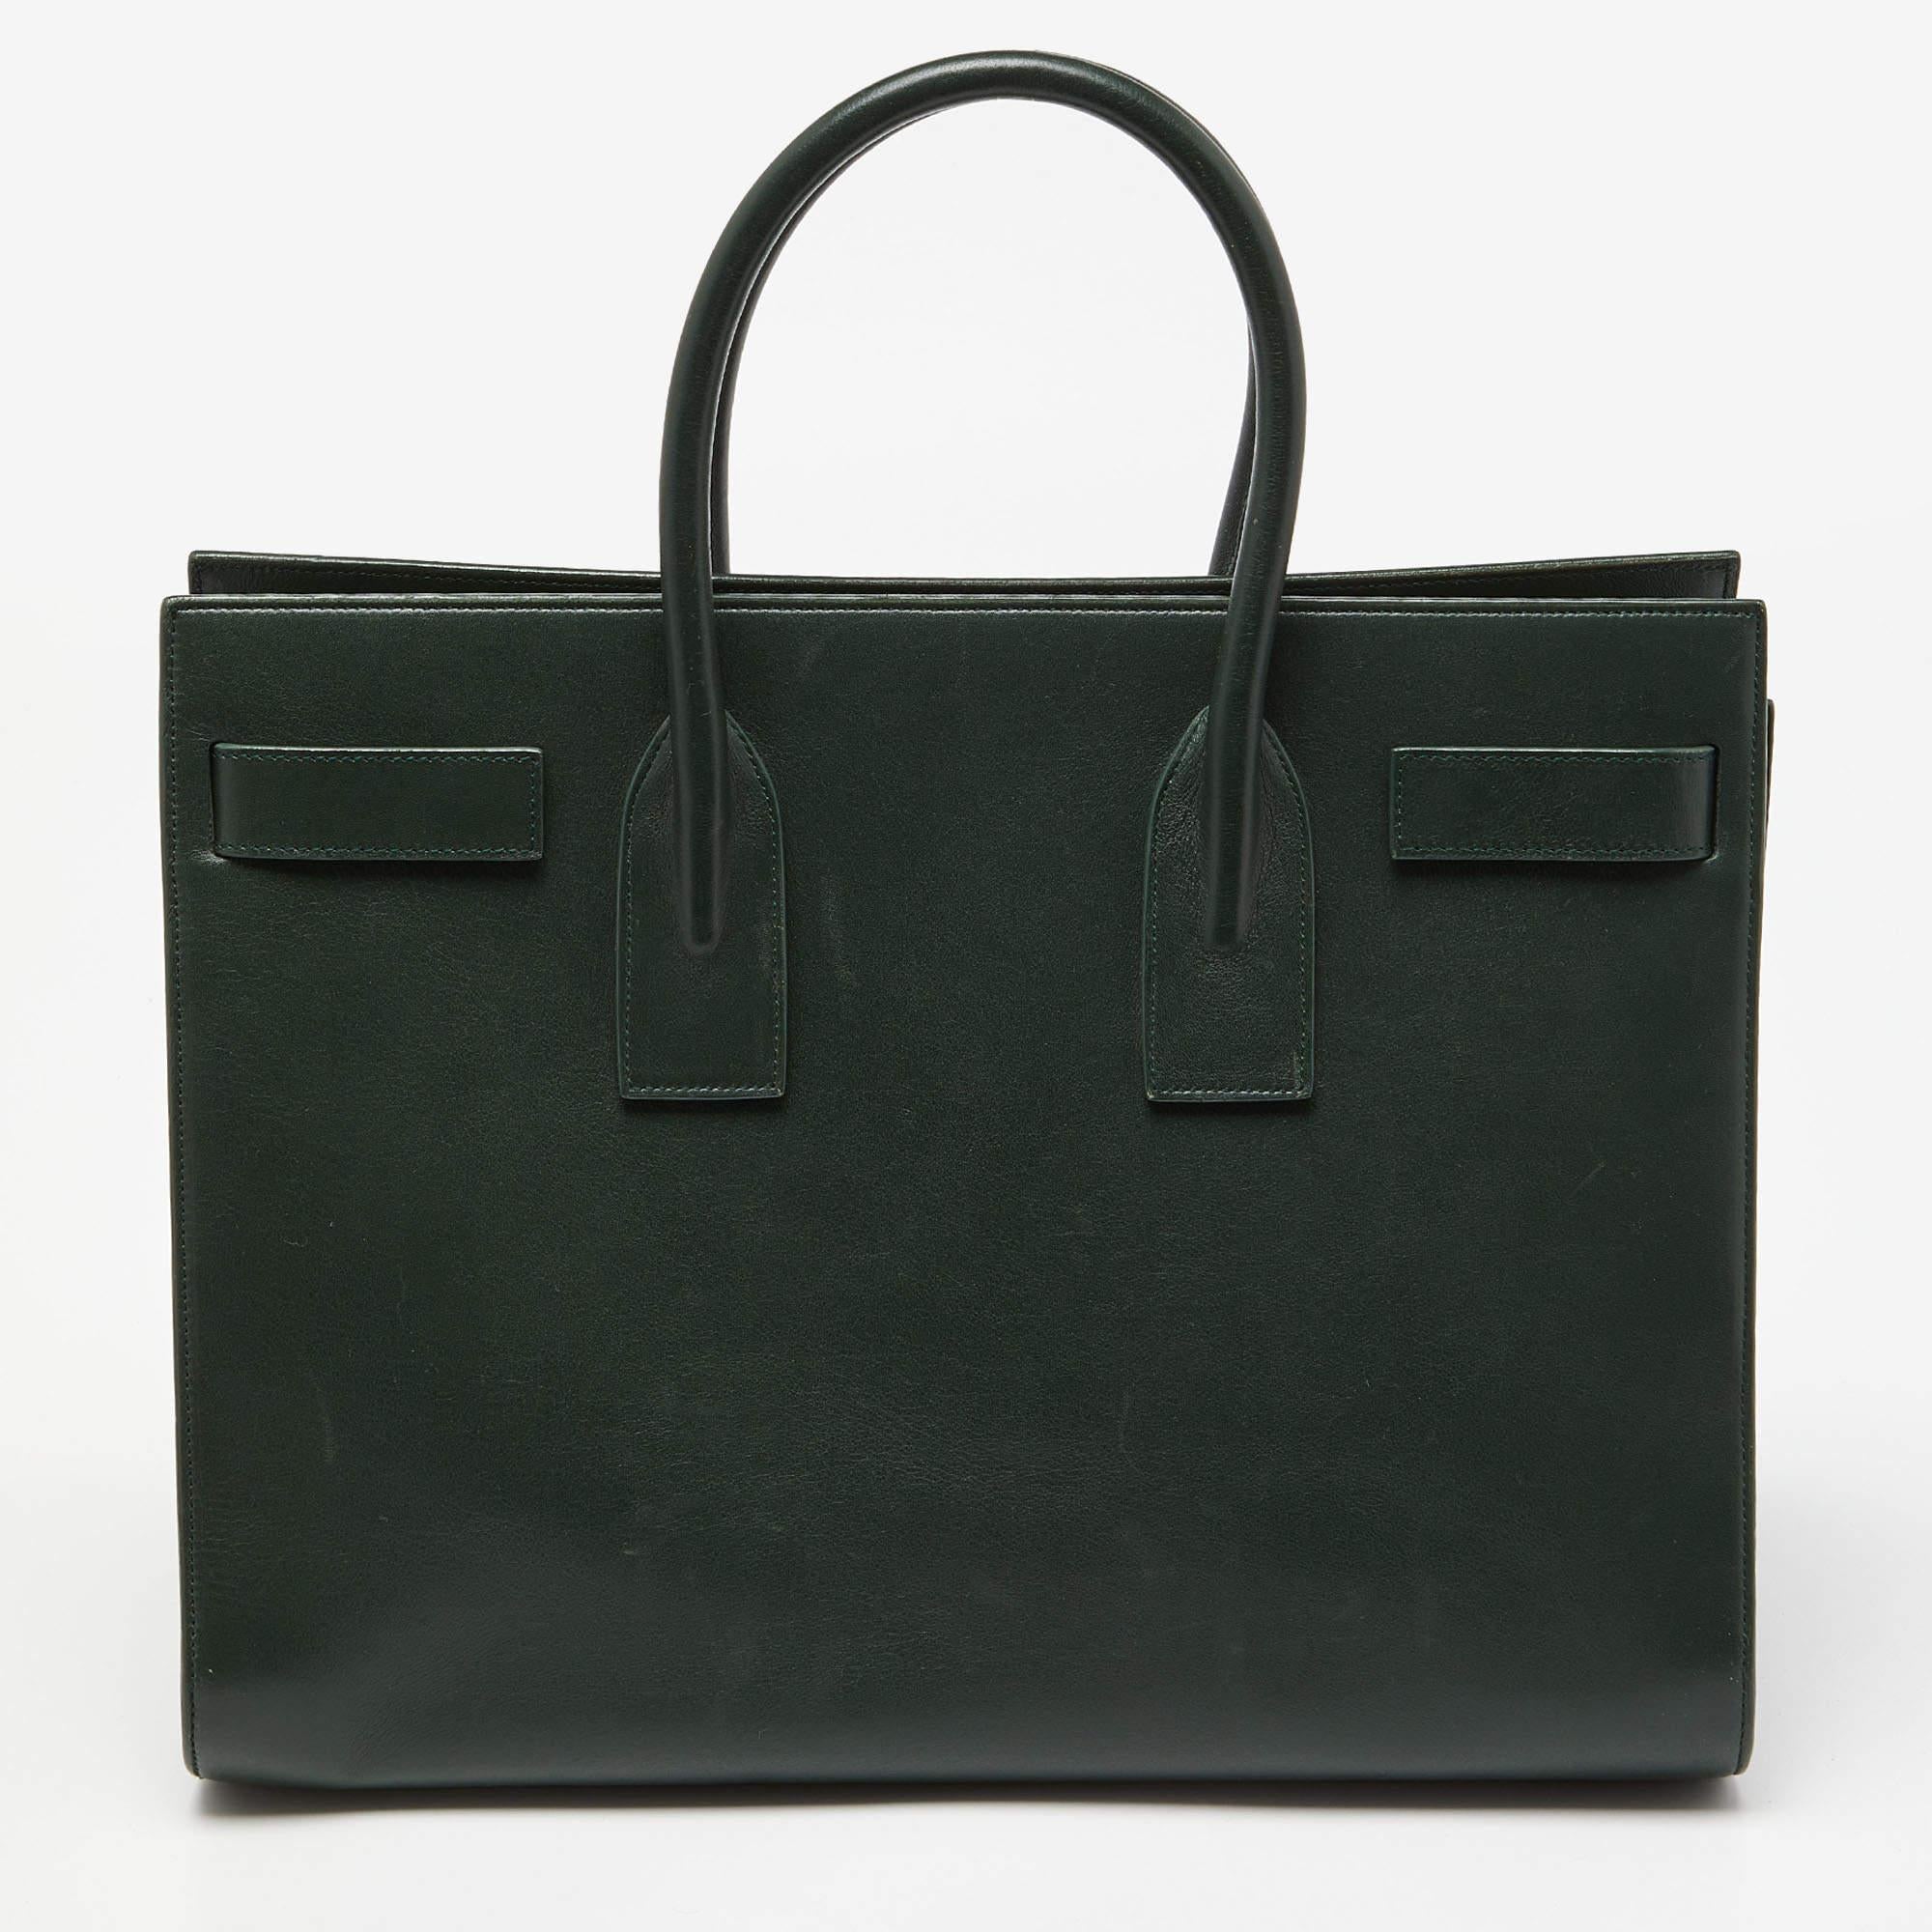 This Sac de Jour tote by Saint Laurent has a structure that exhibits a sophisticated image. Crafted from green leather, the bag can be carried in a chic way by double top handles and a shoulder strap. The tote comes with a stylish interior with